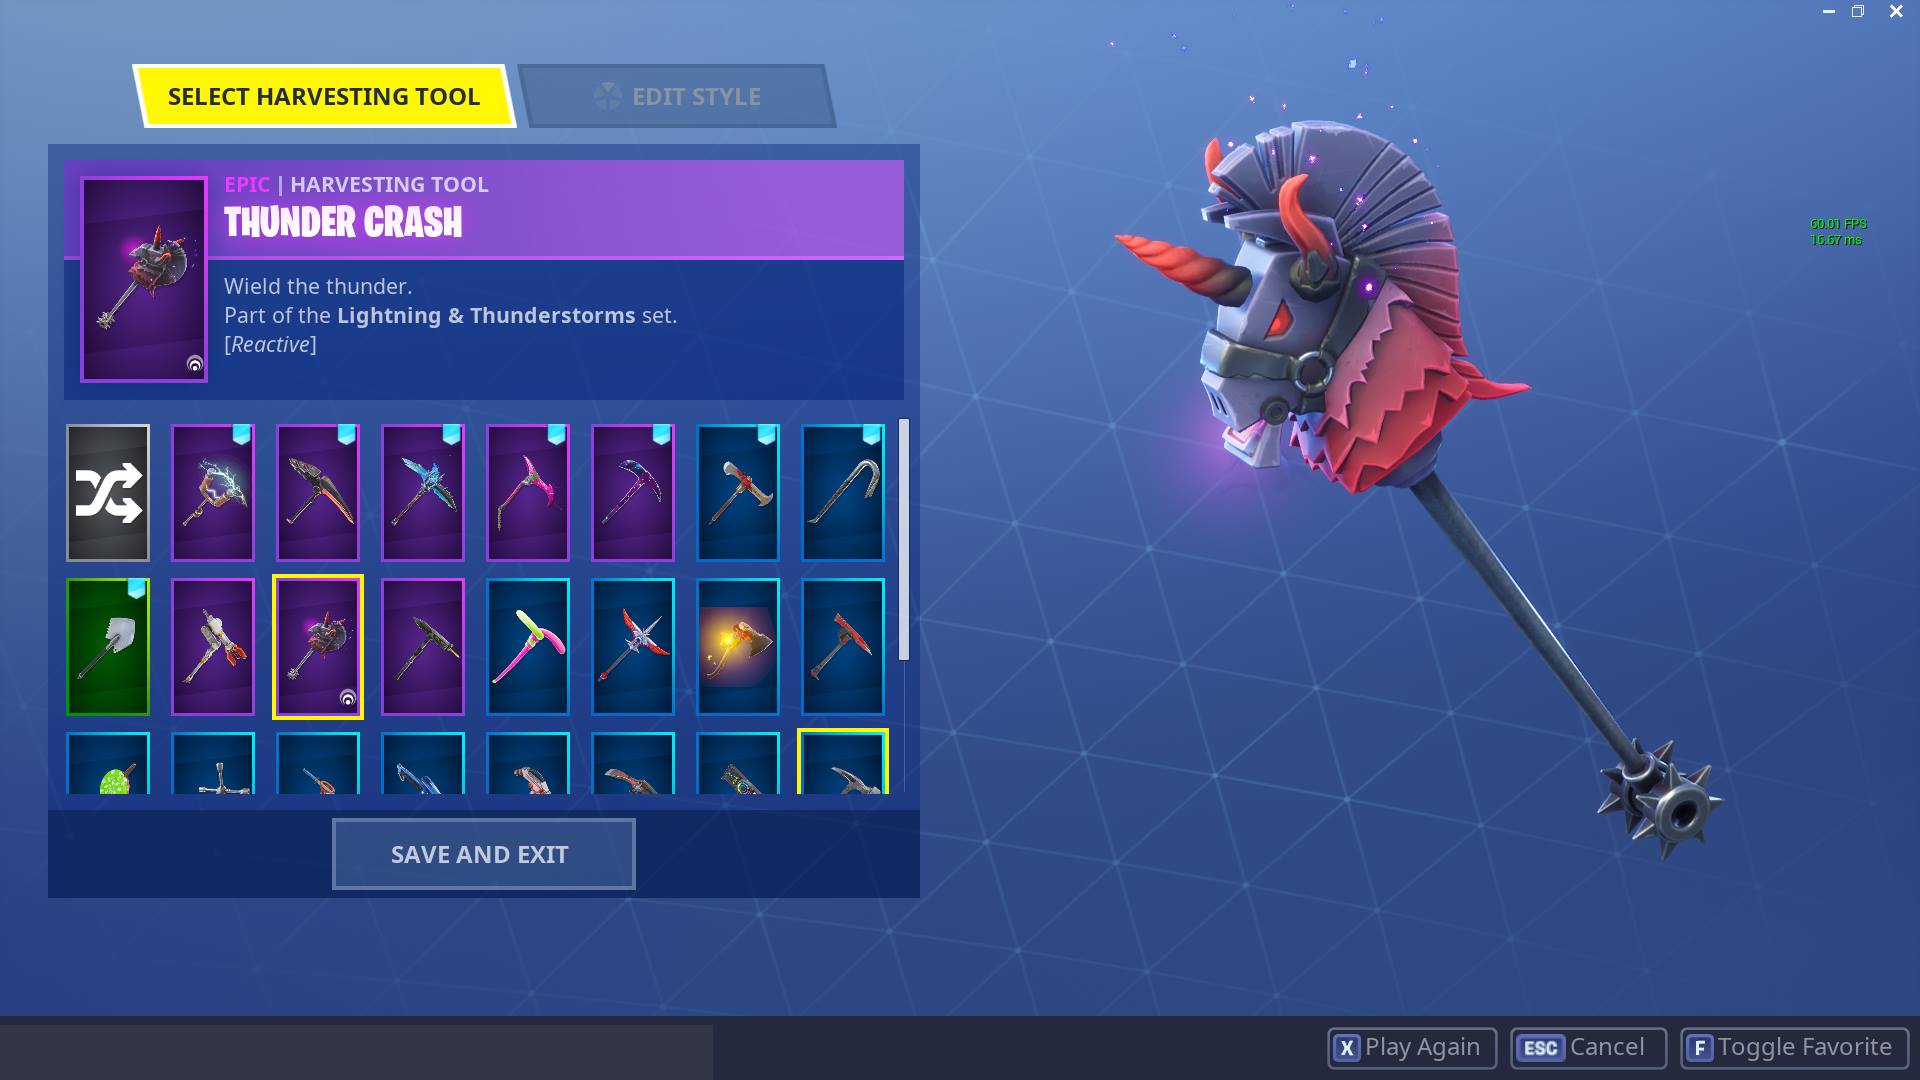 FULL EMAIL ACCESS, EMAIL CHANGEABLE, BLACK KNIGHT, GALAXY SKIN, BATTLEPASSES S2345 MAXED, STARTER PACKS, SUSHI SKINS AND MORE No.25